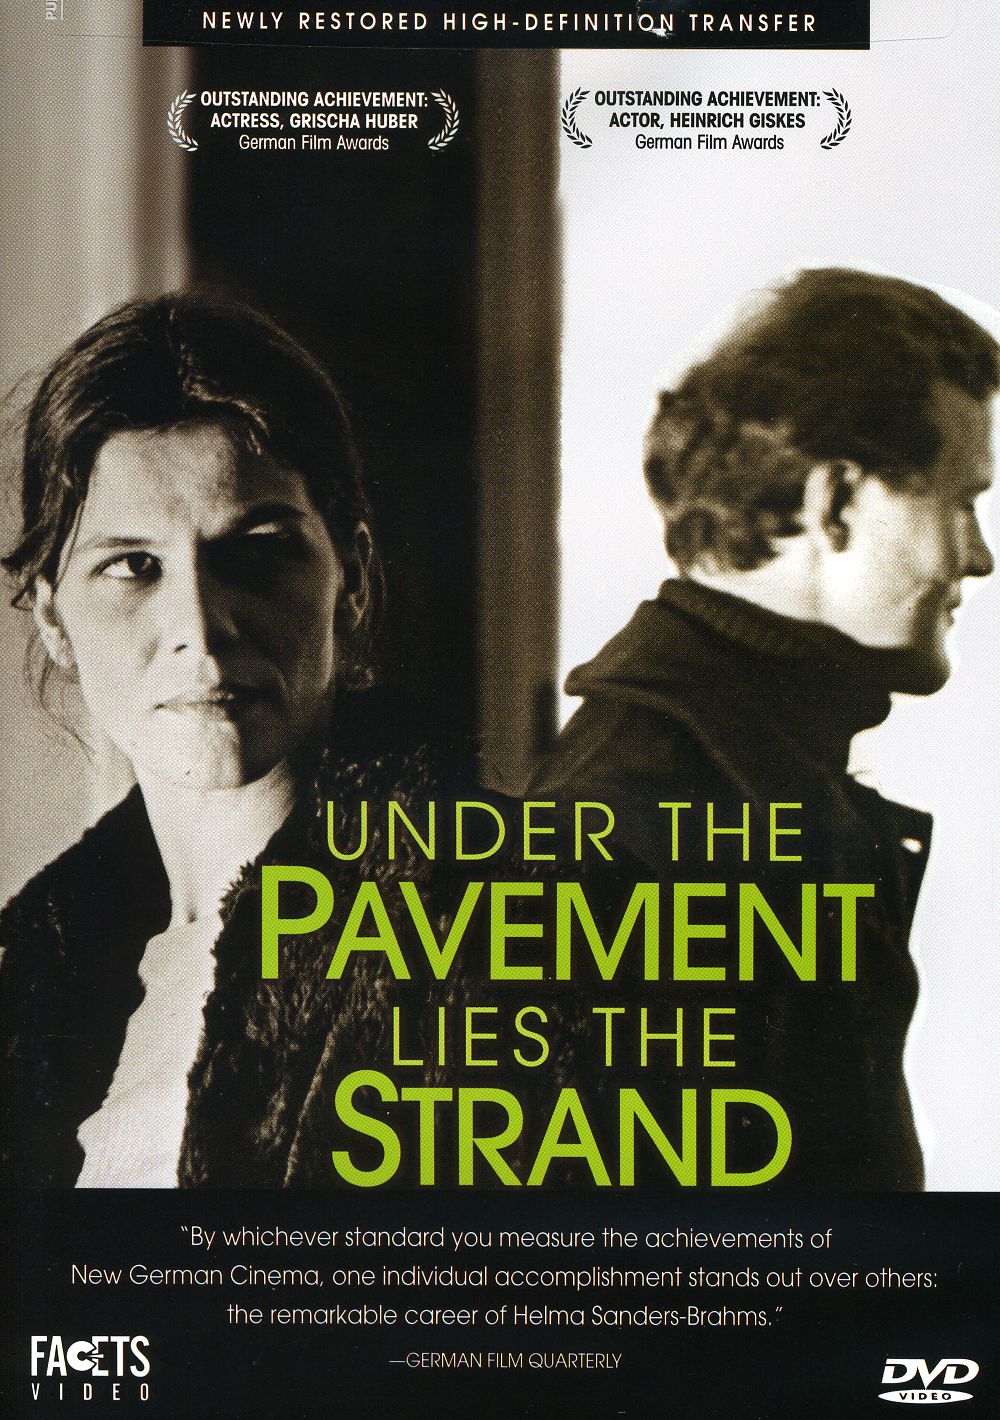 UNDER THE PAVEMENT LIES THE STRAND / (B&W FULL)